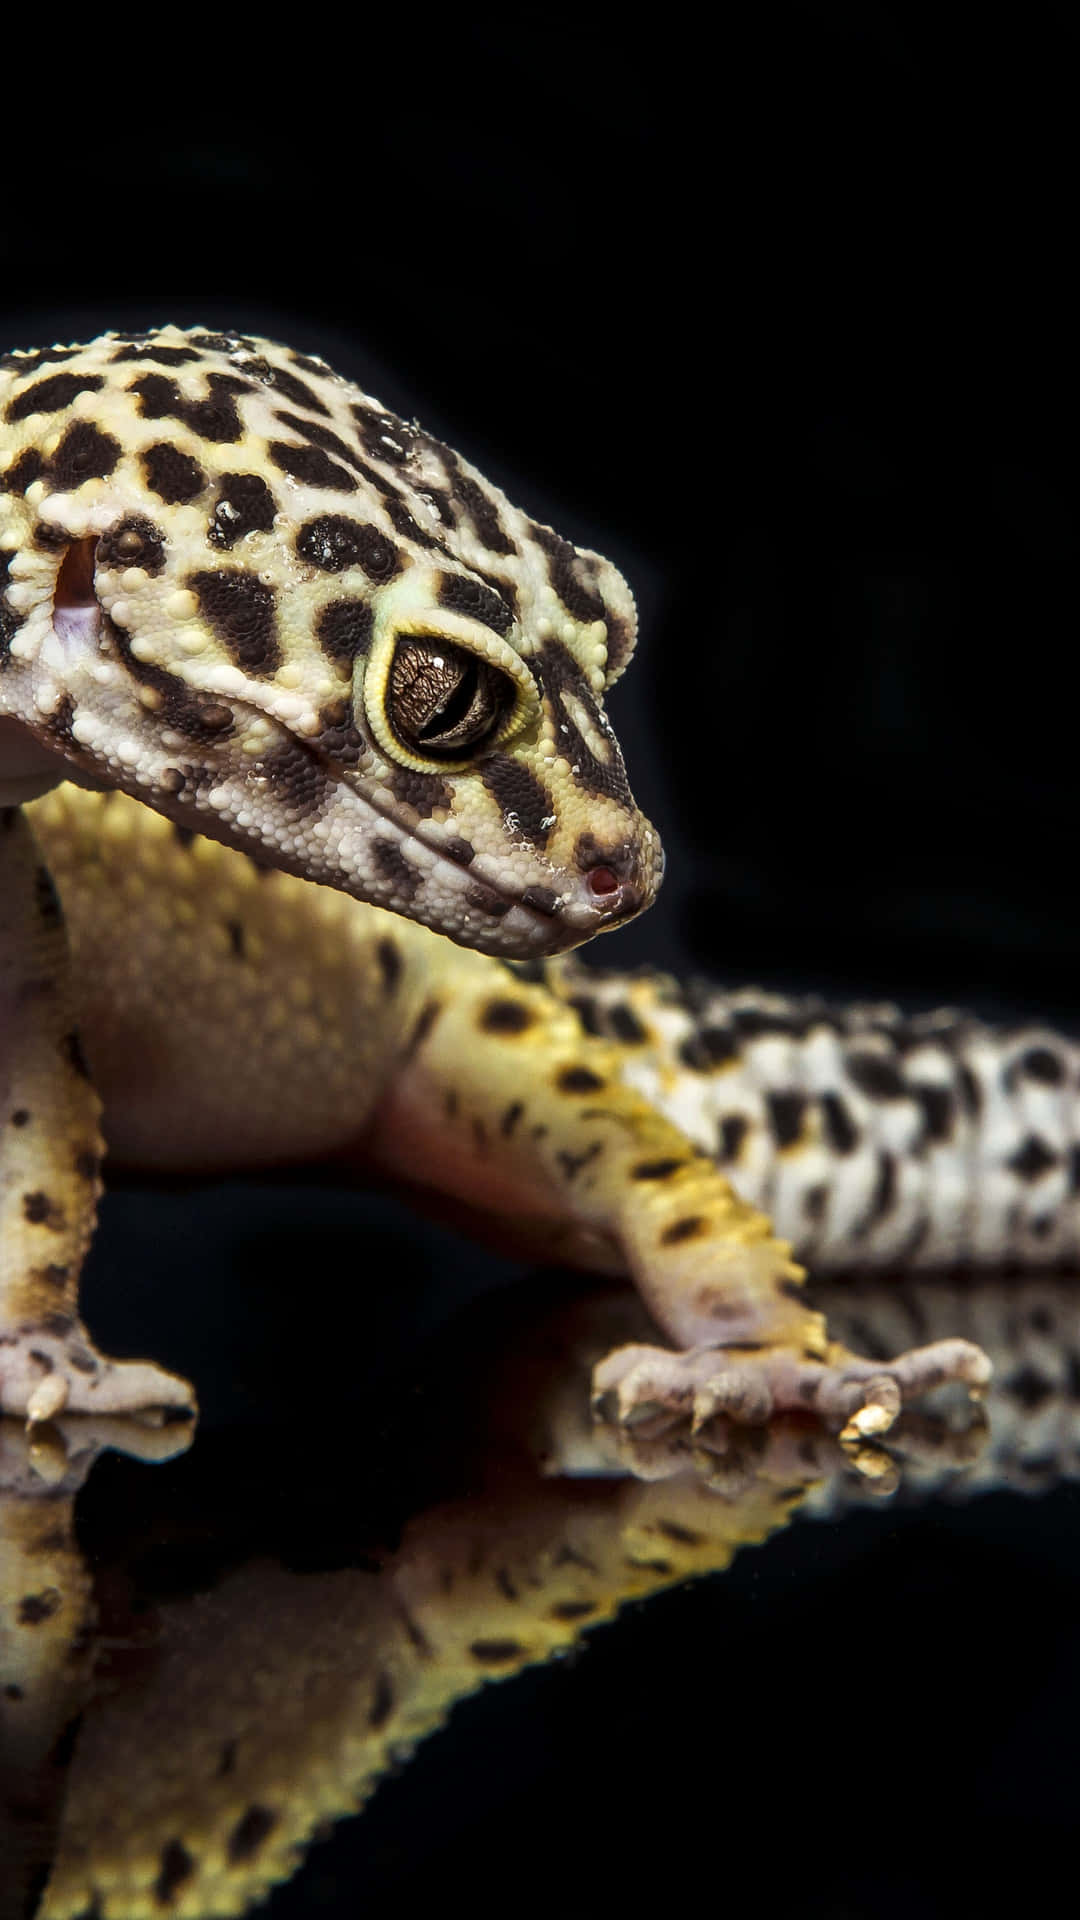 A Gecko Is Standing On A Black Background